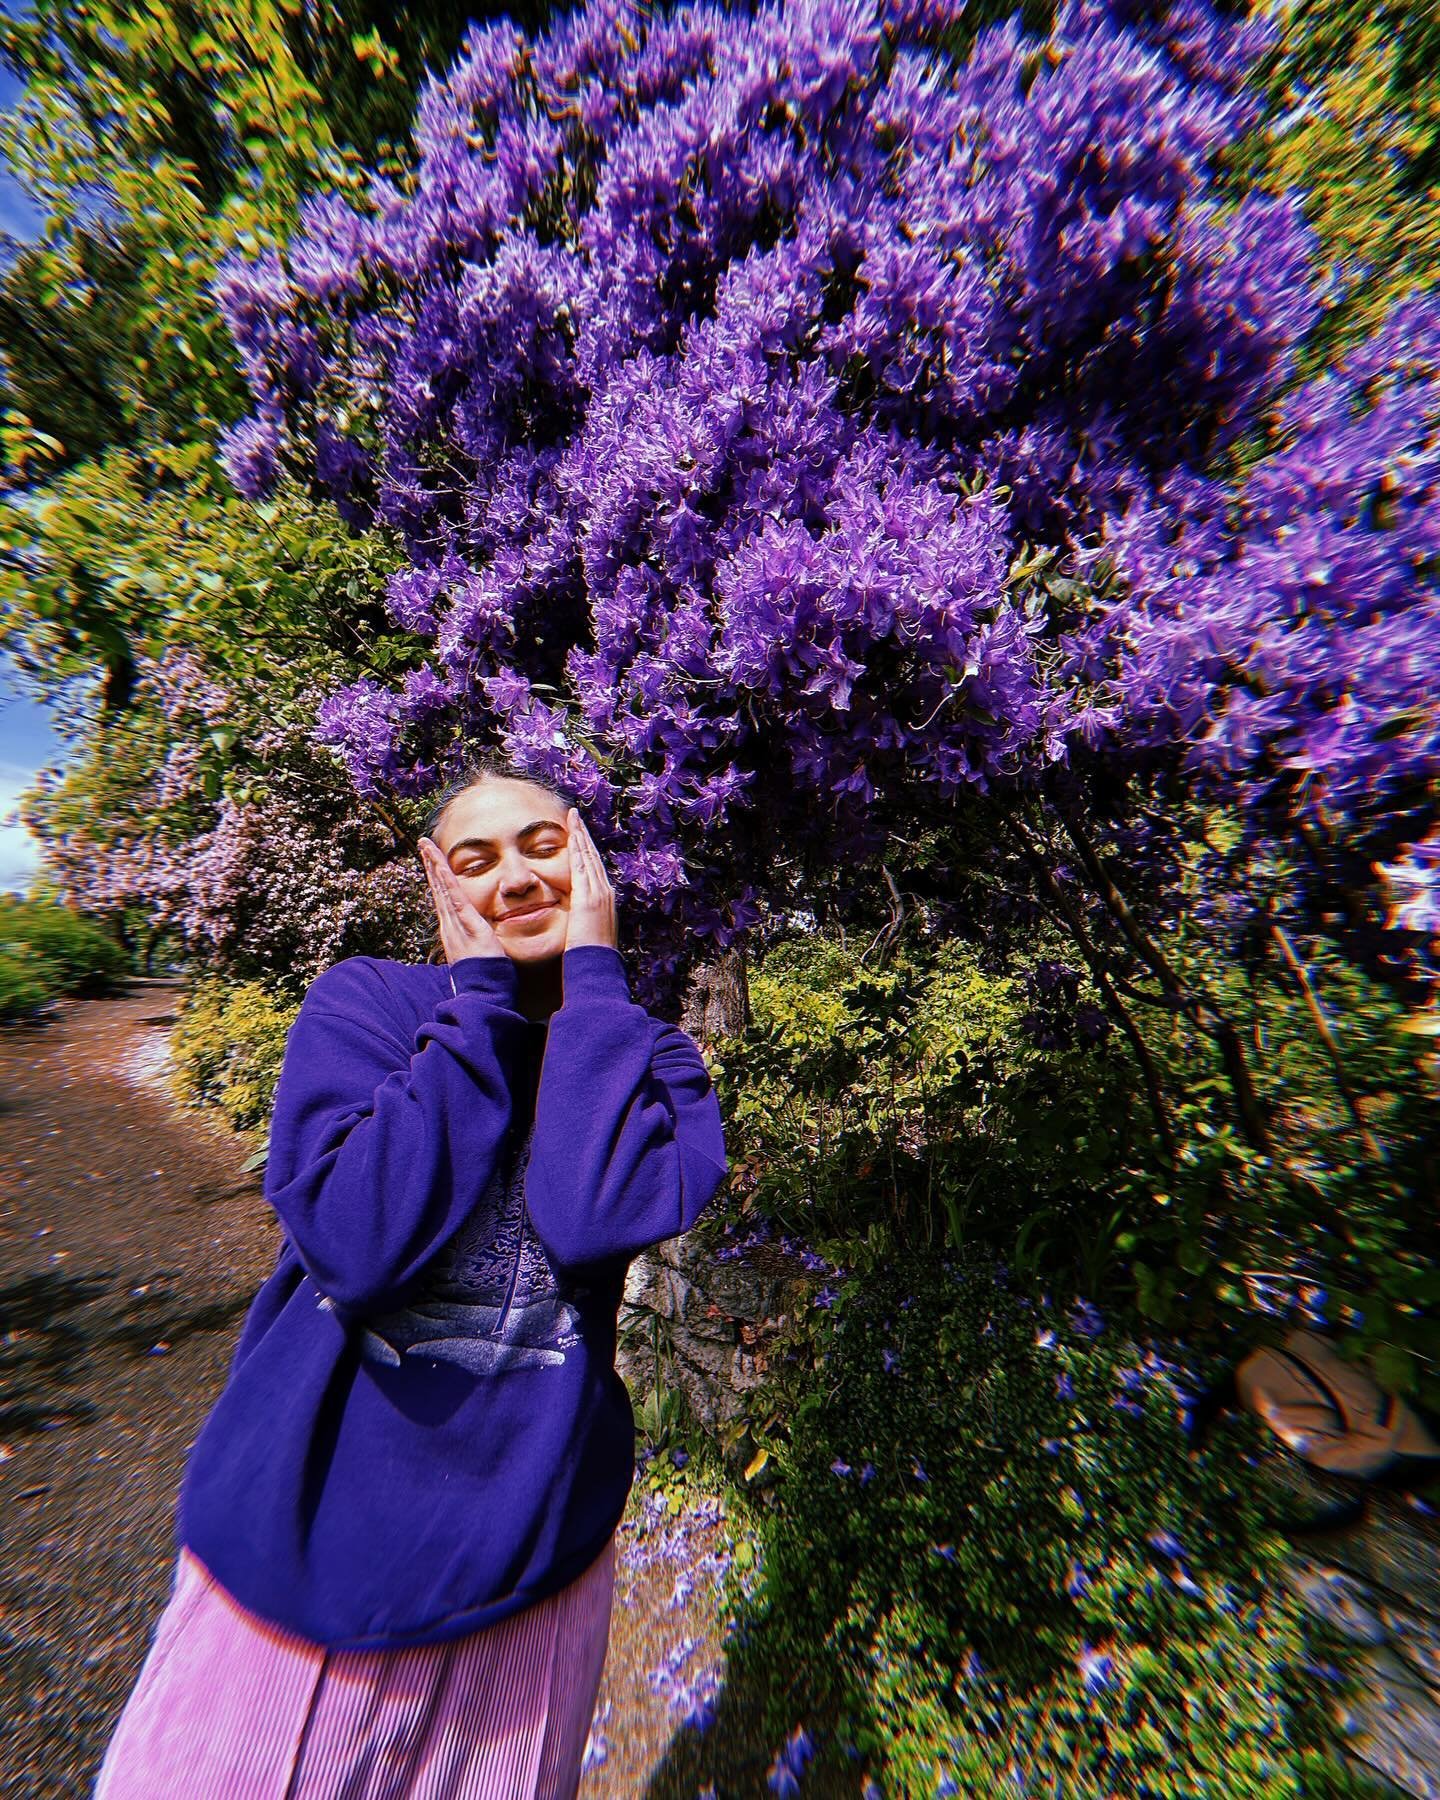 Over the last few days I&rsquo;ve been mentally planning out some thought out reel/caption combo about me blooming with the flowers and entering into spring but you&rsquo;re receiving this message instead because I&rsquo;m a busy bee 🌸🐝

Which is g